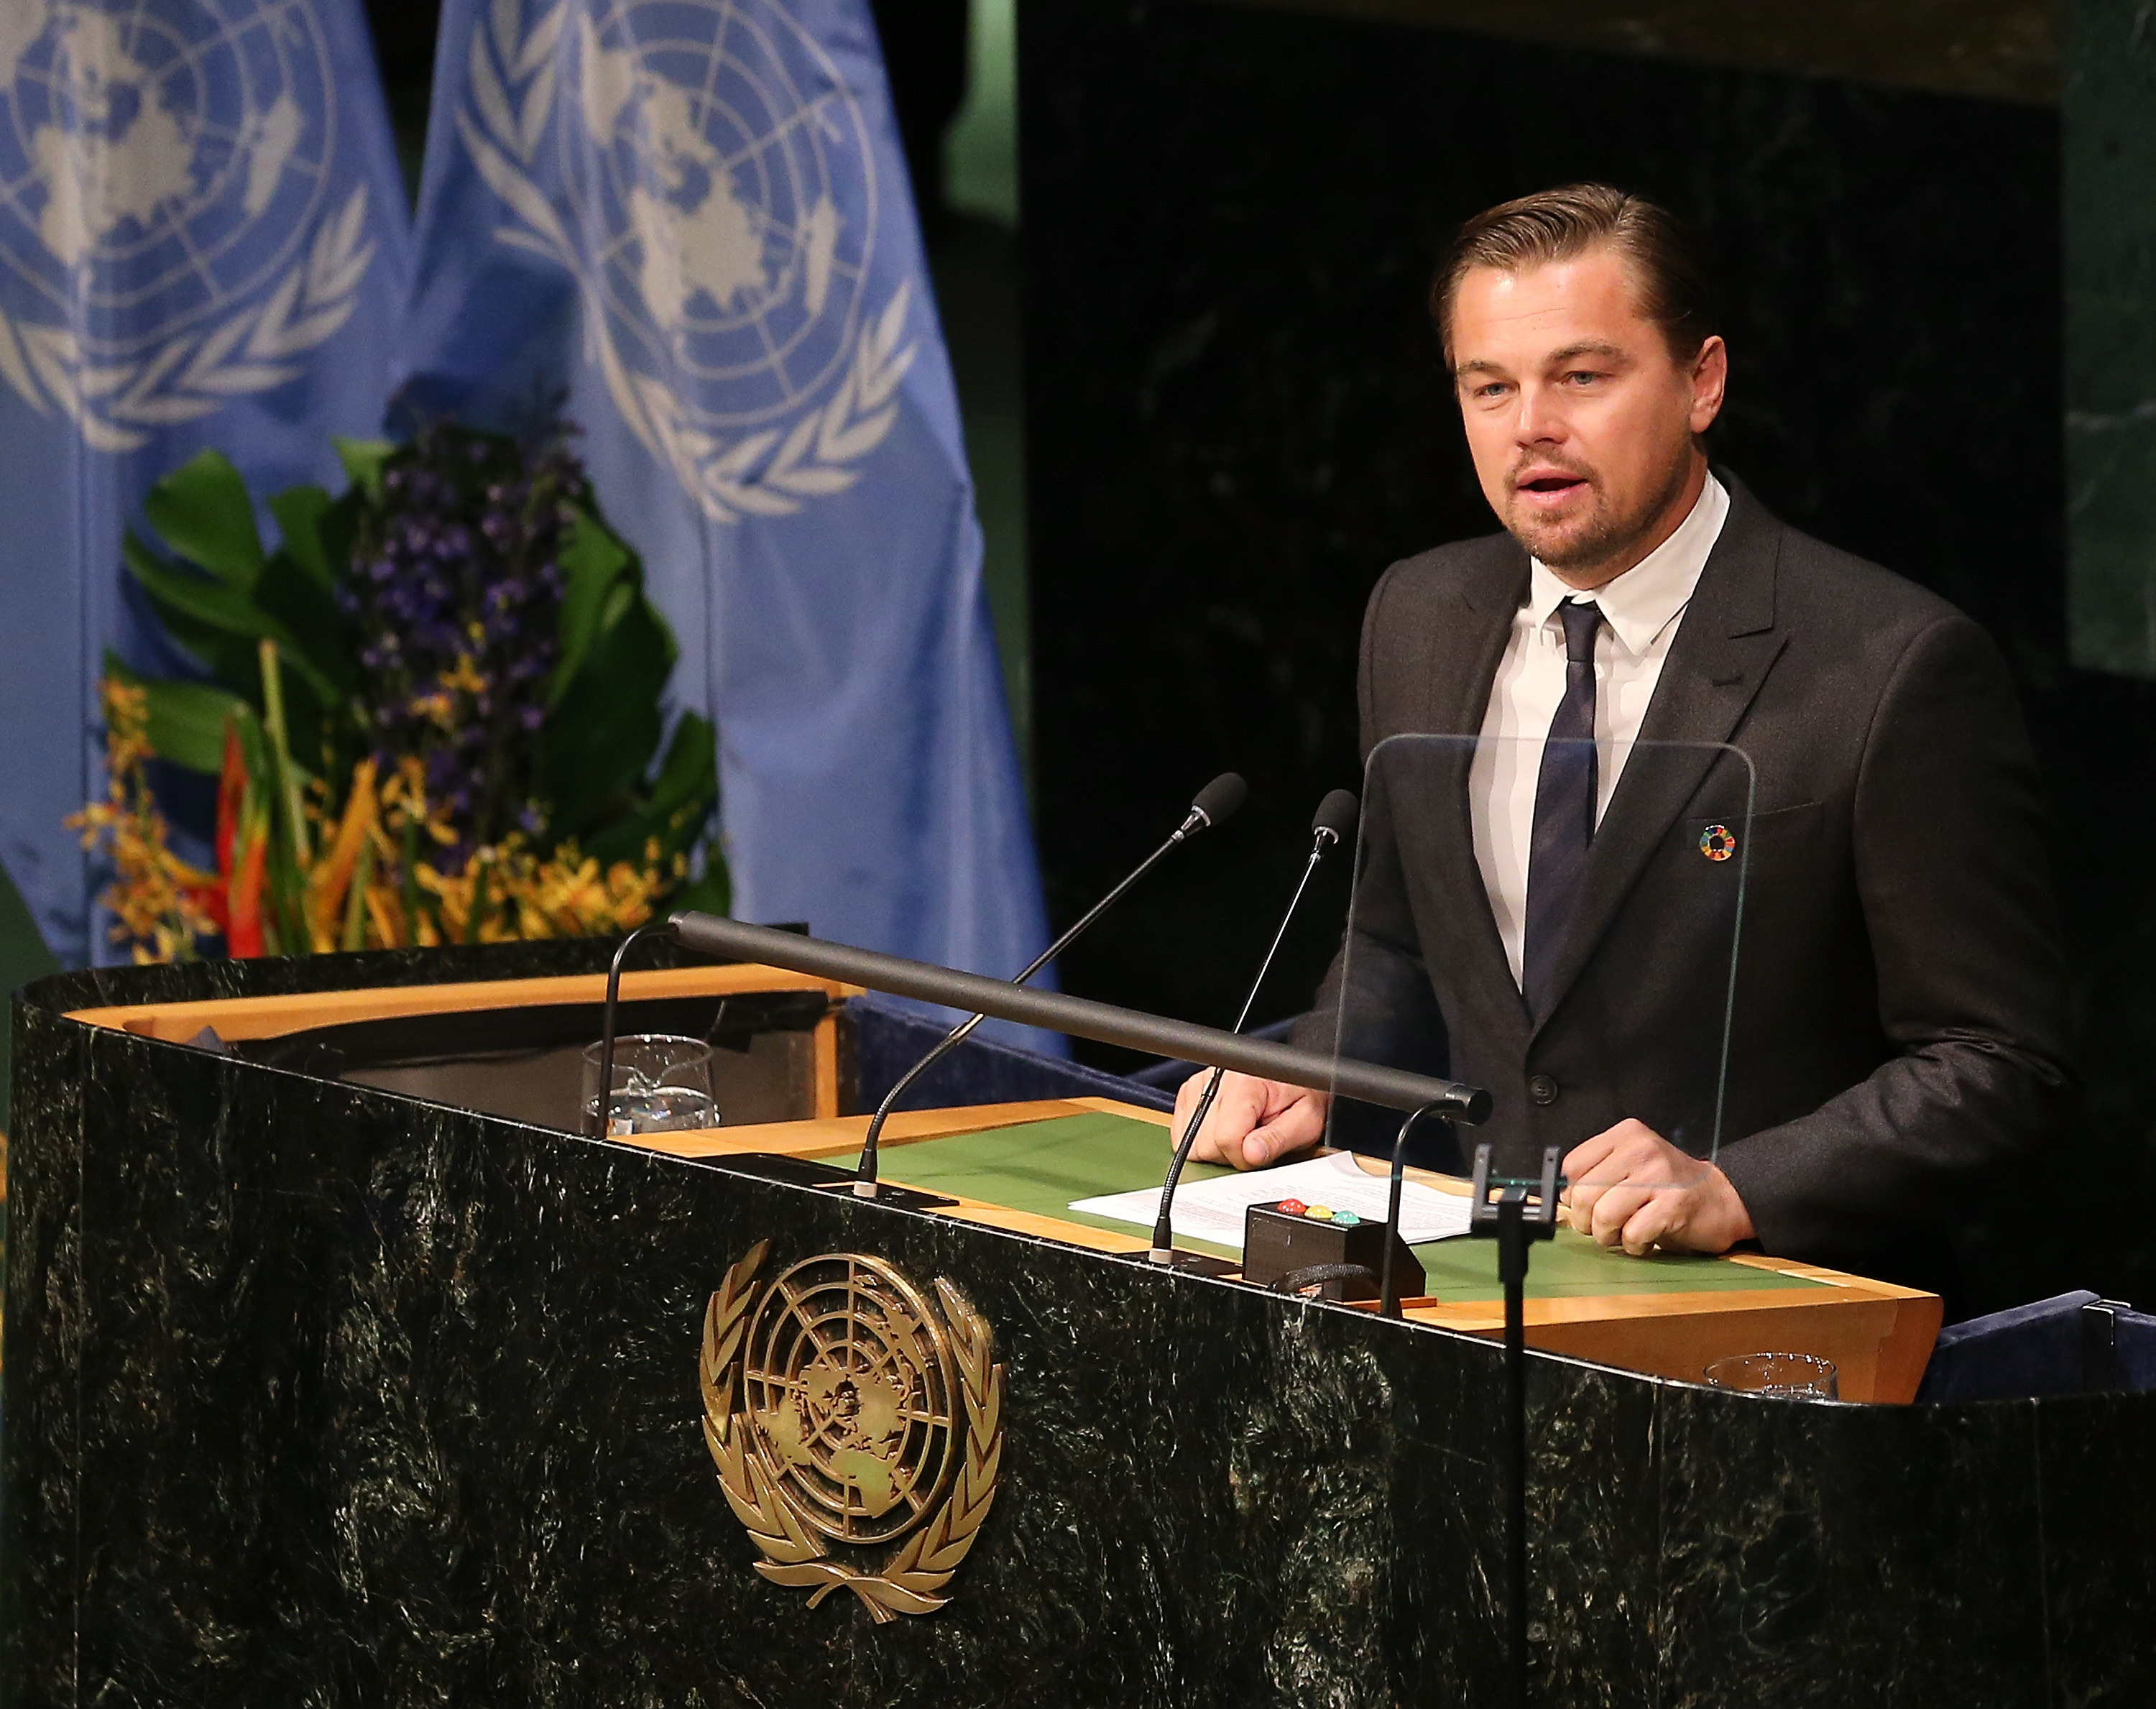 Actor/activist Leonardo DiCaprio speaks during the Paris Agreement For Climate Change Signing at United Nations on April 22, 2016 in New York City